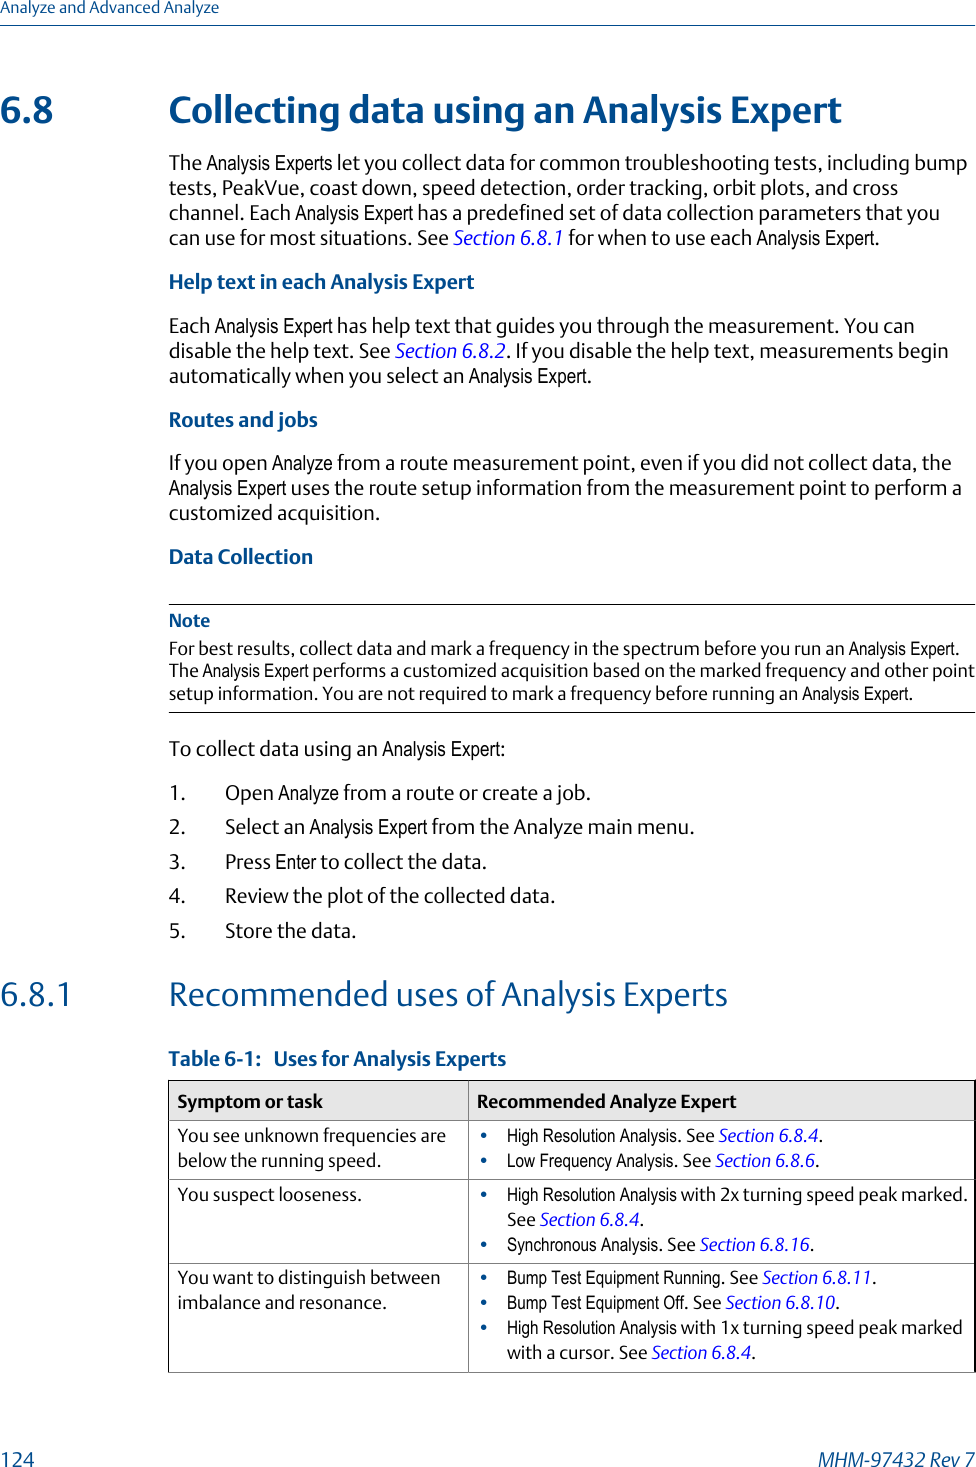 6.8 Collecting data using an Analysis ExpertThe Analysis Experts let you collect data for common troubleshooting tests, including bumptests, PeakVue, coast down, speed detection, order tracking, orbit plots, and crosschannel. Each Analysis Expert has a predefined set of data collection parameters that youcan use for most situations. See Section 6.8.1 for when to use each Analysis Expert.Help text in each Analysis ExpertEach Analysis Expert has help text that guides you through the measurement. You candisable the help text. See Section 6.8.2. If you disable the help text, measurements beginautomatically when you select an Analysis Expert.Routes and jobsIf you open Analyze from a route measurement point, even if you did not collect data, theAnalysis Expert uses the route setup information from the measurement point to perform acustomized acquisition.Data CollectionNoteFor best results, collect data and mark a frequency in the spectrum before you run an Analysis Expert.The Analysis Expert performs a customized acquisition based on the marked frequency and other pointsetup information. You are not required to mark a frequency before running an Analysis Expert.To collect data using an Analysis Expert:1. Open Analyze from a route or create a job.2. Select an Analysis Expert from the Analyze main menu.3. Press Enter to collect the data.4. Review the plot of the collected data.5. Store the data.6.8.1 Recommended uses of Analysis ExpertsUses for Analysis ExpertsTable 6-1:   Symptom or task Recommended Analyze ExpertYou see unknown frequencies arebelow the running speed.•High Resolution Analysis. See Section 6.8.4.•Low Frequency Analysis. See Section 6.8.6.You suspect looseness. •High Resolution Analysis with 2x turning speed peak marked.See Section 6.8.4.•Synchronous Analysis. See Section 6.8.16.You want to distinguish betweenimbalance and resonance.•Bump Test Equipment Running. See Section 6.8.11.•Bump Test Equipment Off. See Section 6.8.10.•High Resolution Analysis with 1x turning speed peak markedwith a cursor. See Section 6.8.4.Analyze and Advanced Analyze124 MHM-97432 Rev 7